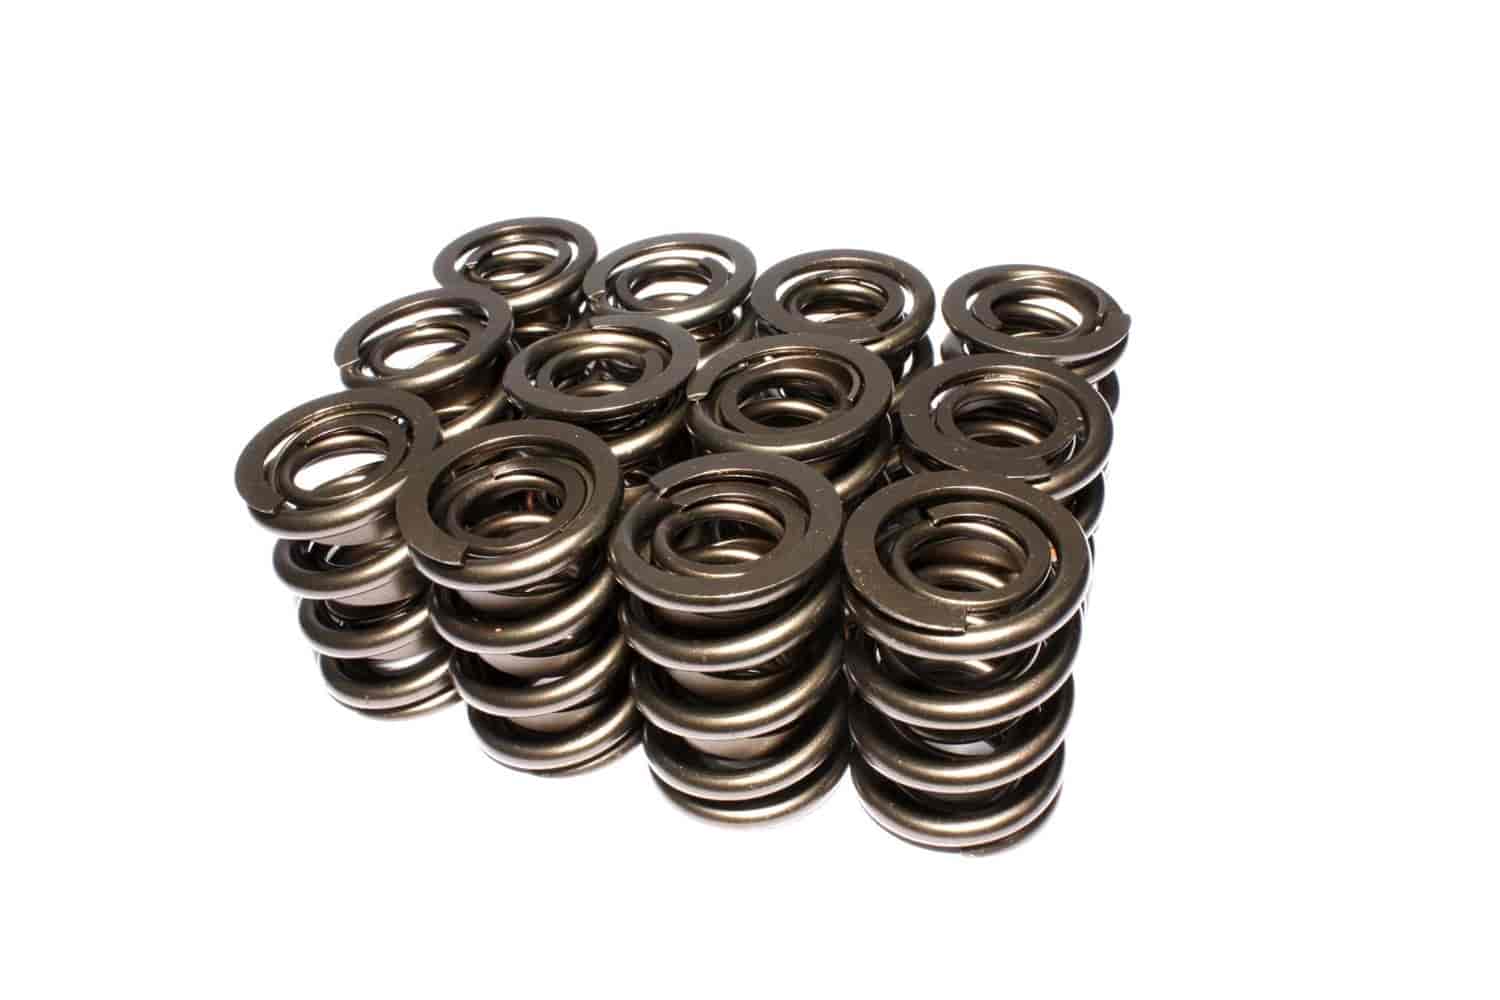 Dual Valve Springs Outer Spring O.D.: 1.650 in.